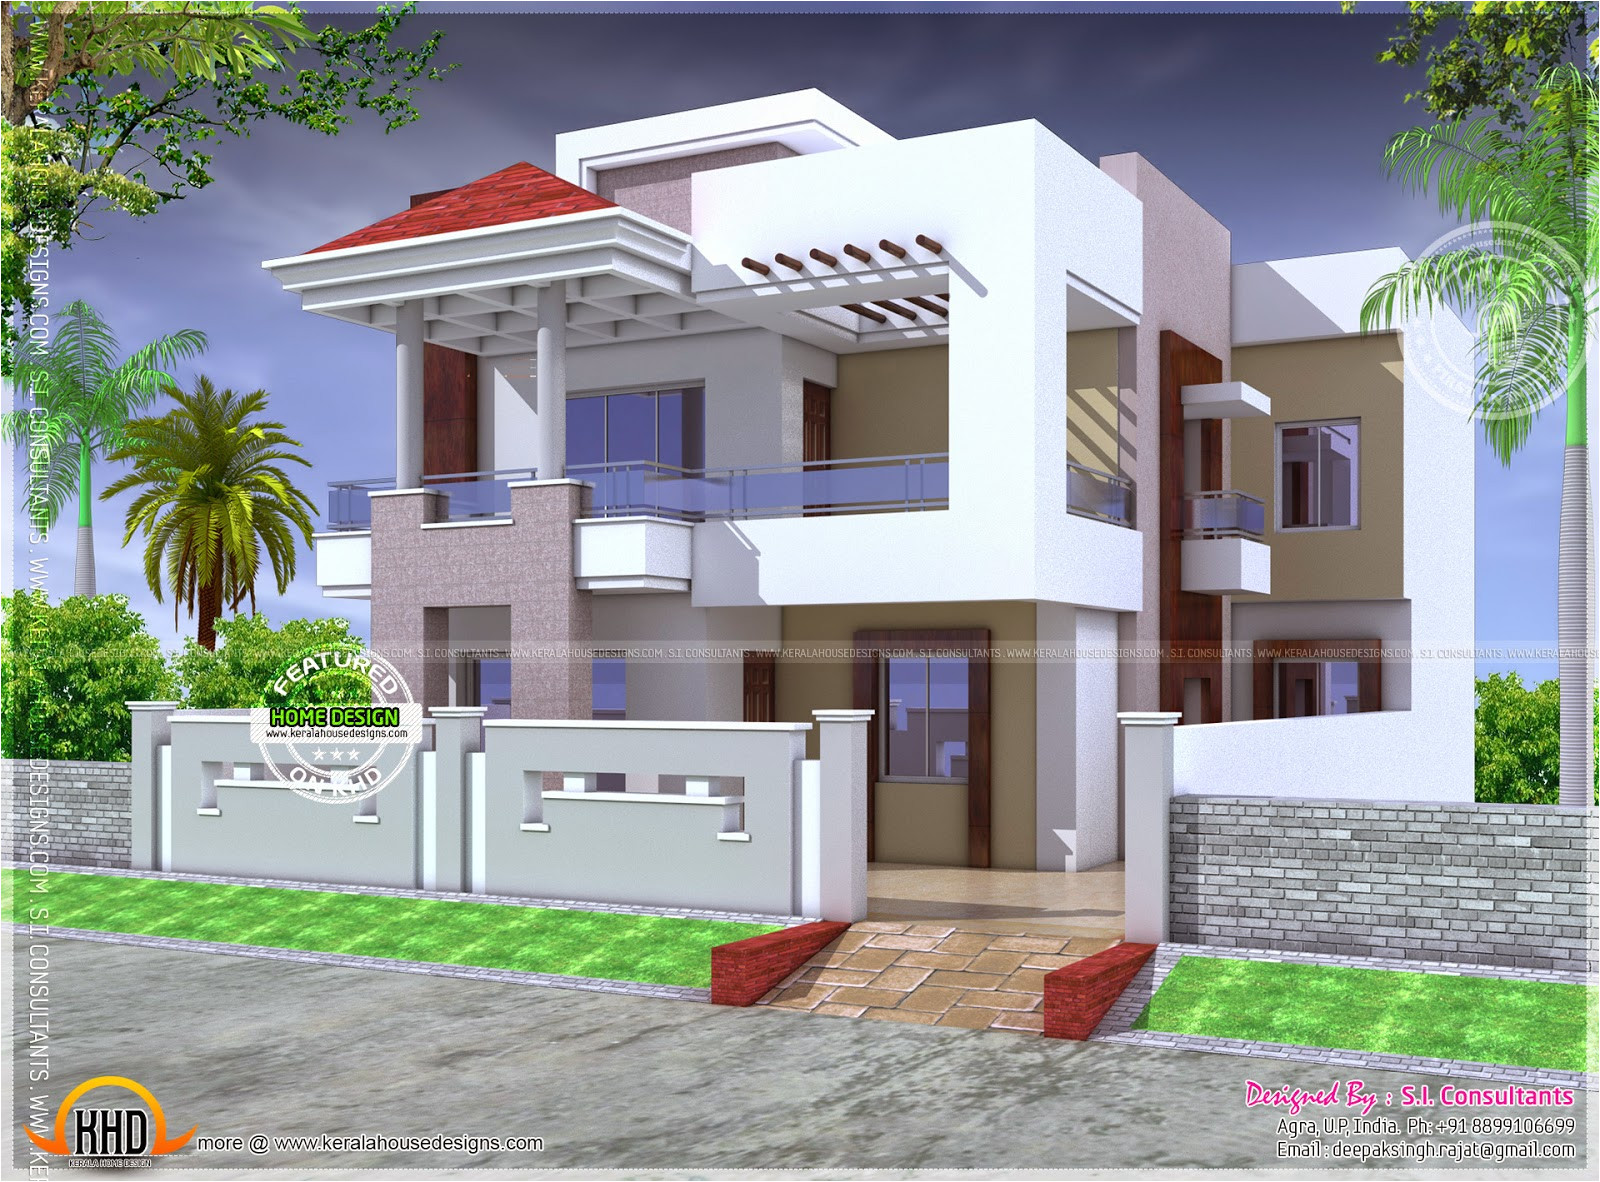 Free Home Plans Indian Style March 2014 Kerala Home Design and Floor Plans